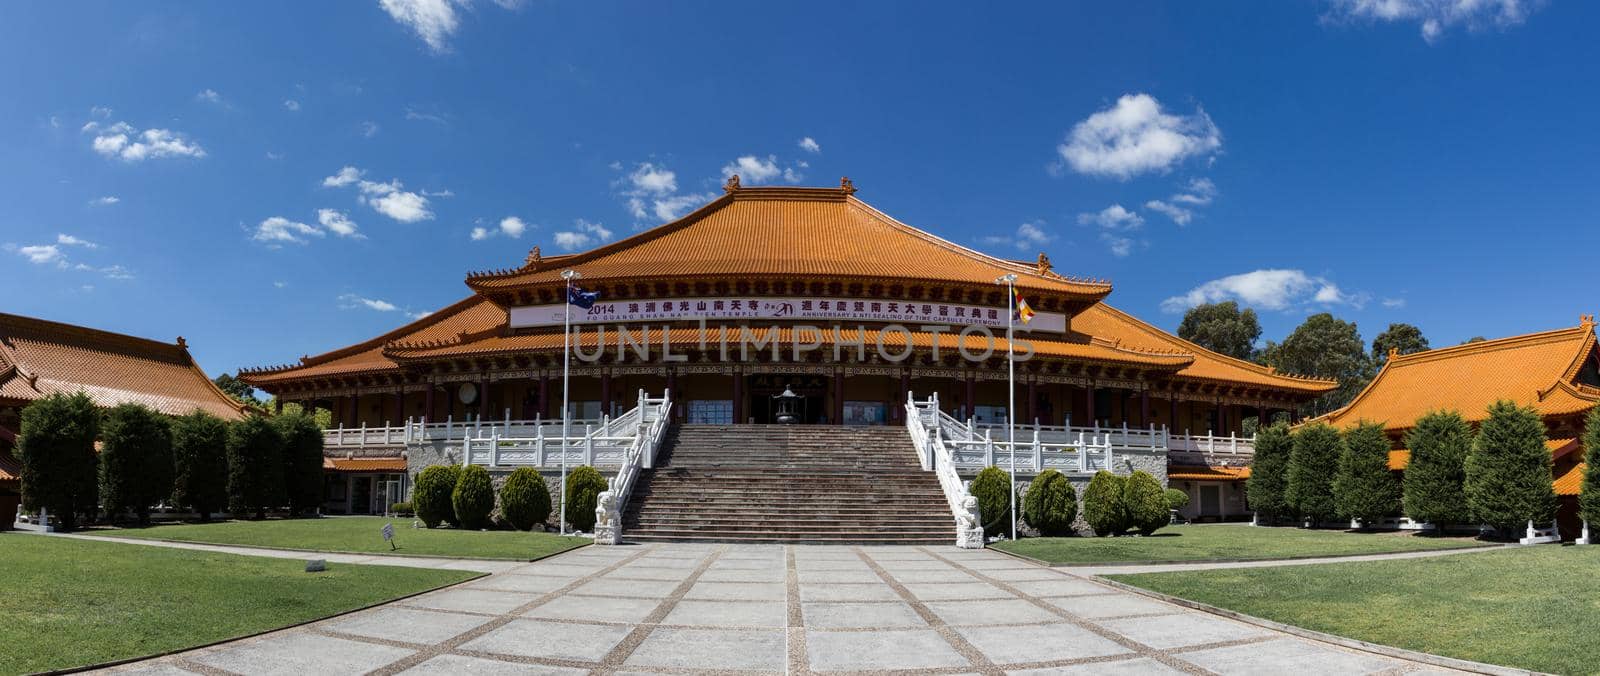 Panorama of Nan Tien Temple Buddha religion in Australia by bettercallcurry